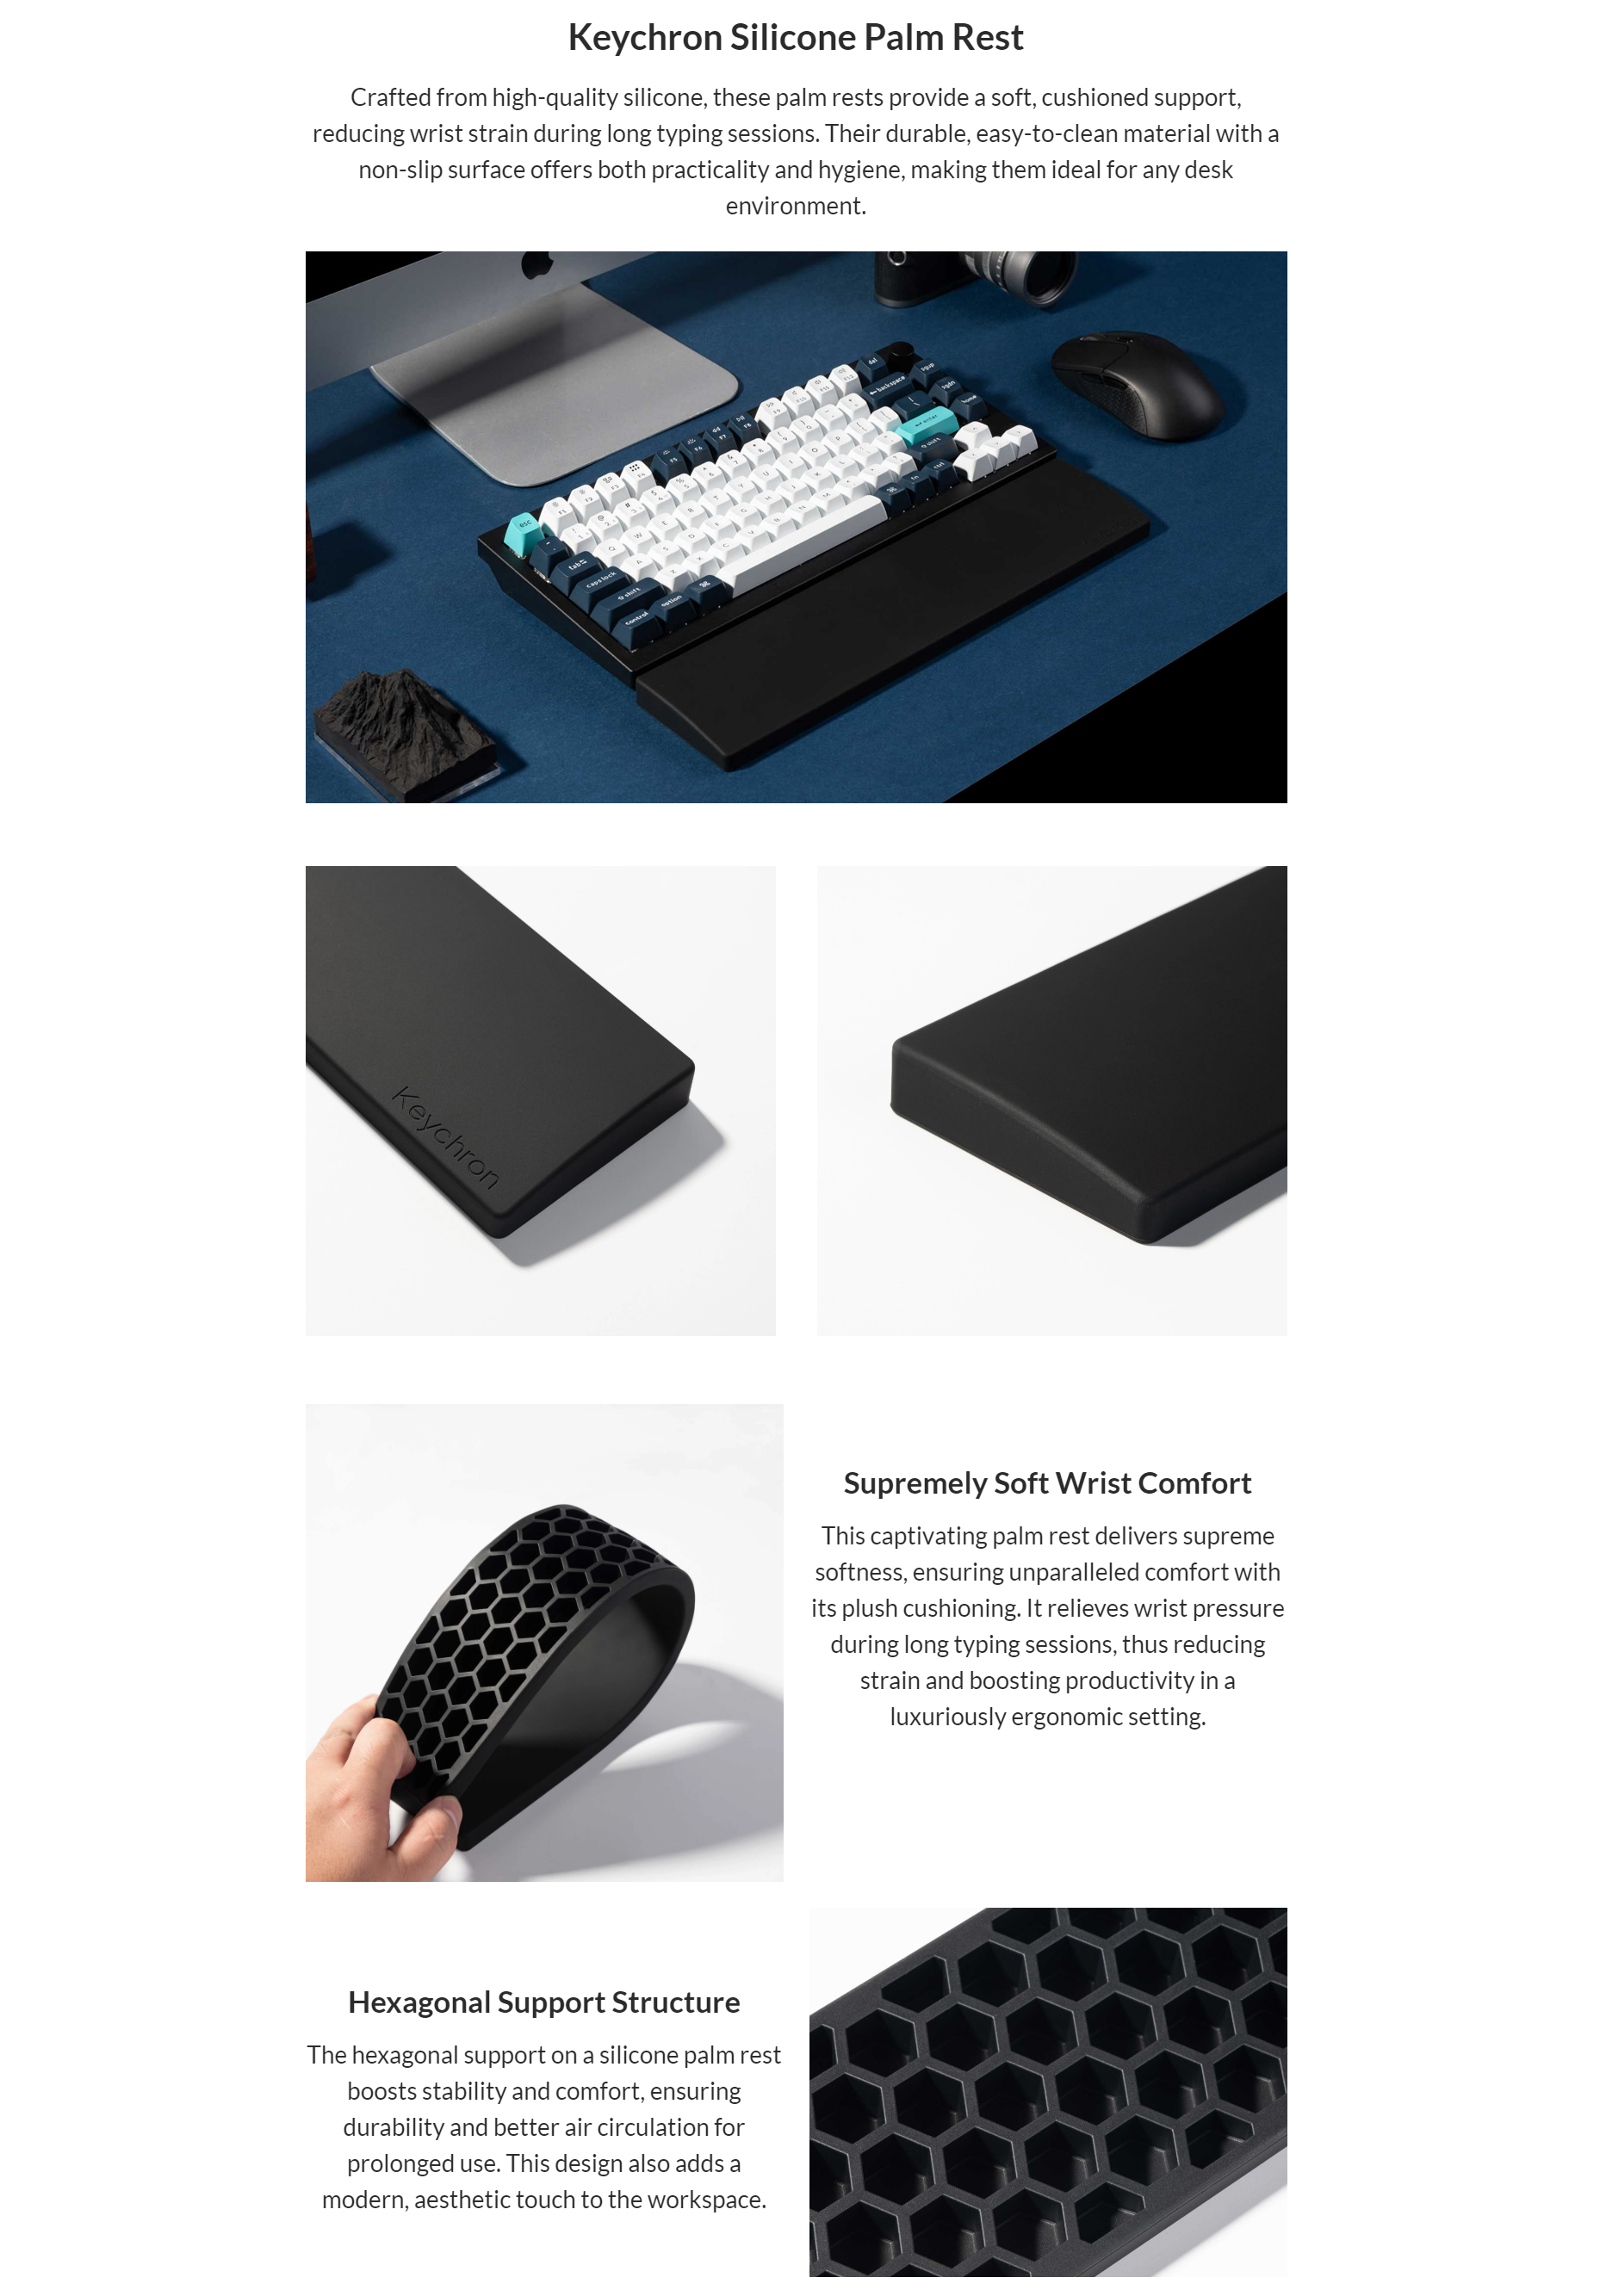 A large marketing image providing additional information about the product Keychron PR48 Silicone Palm Rest - Additional alt info not provided